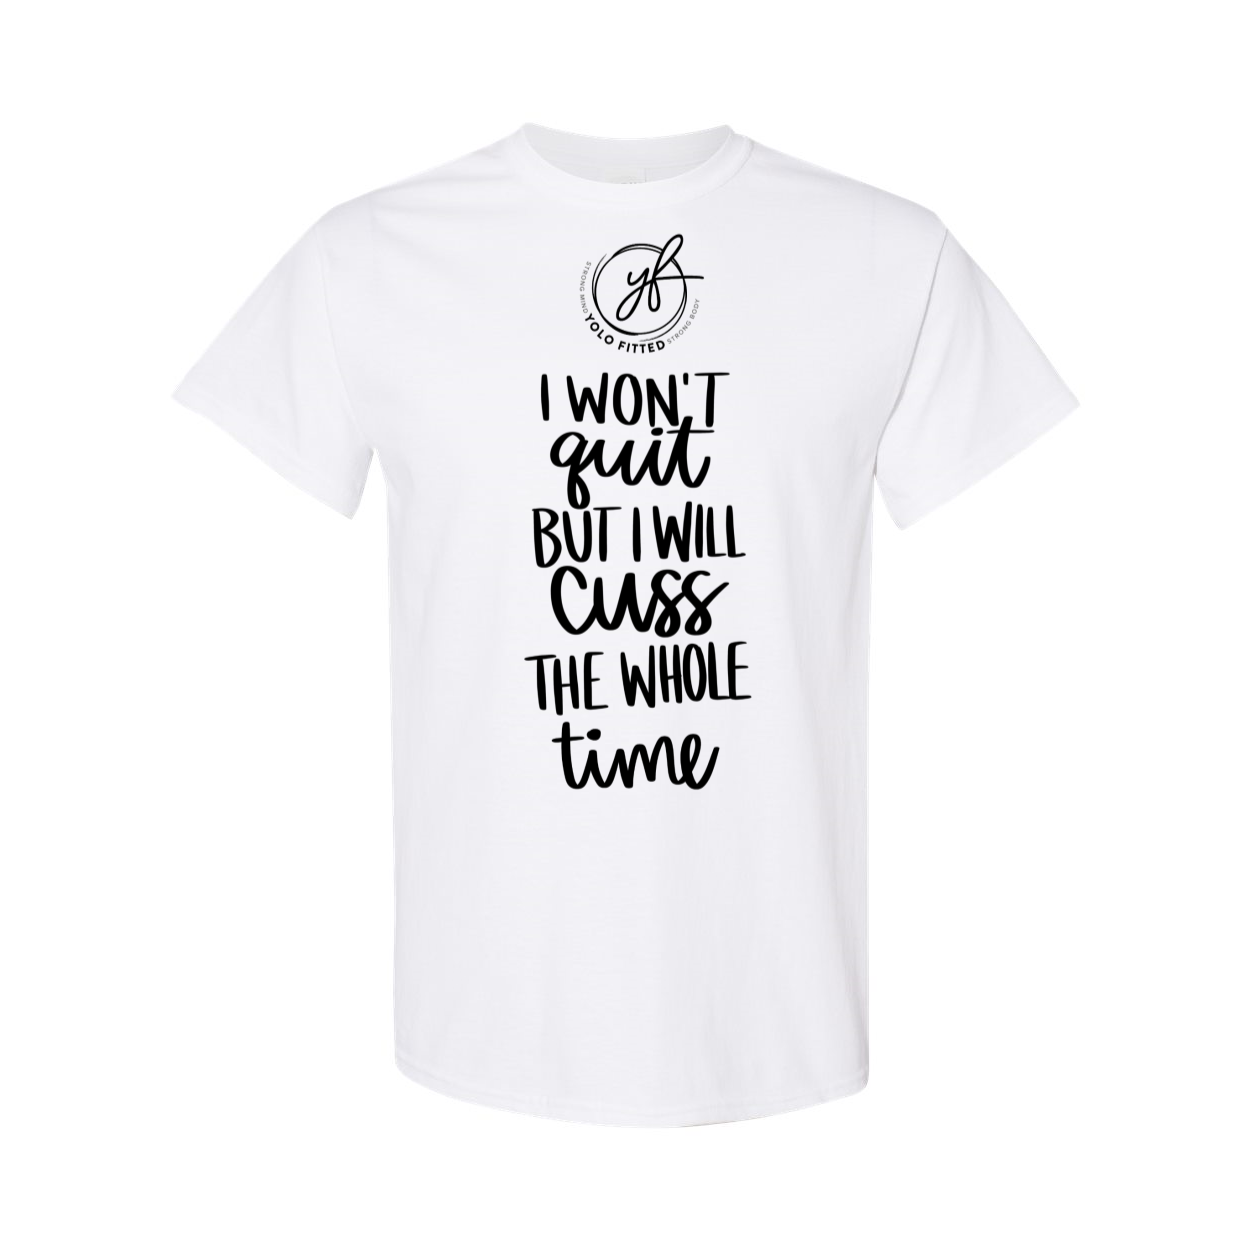 YOLO FITTED I WON'T QUIT UNISEX TEE - Yolofitted